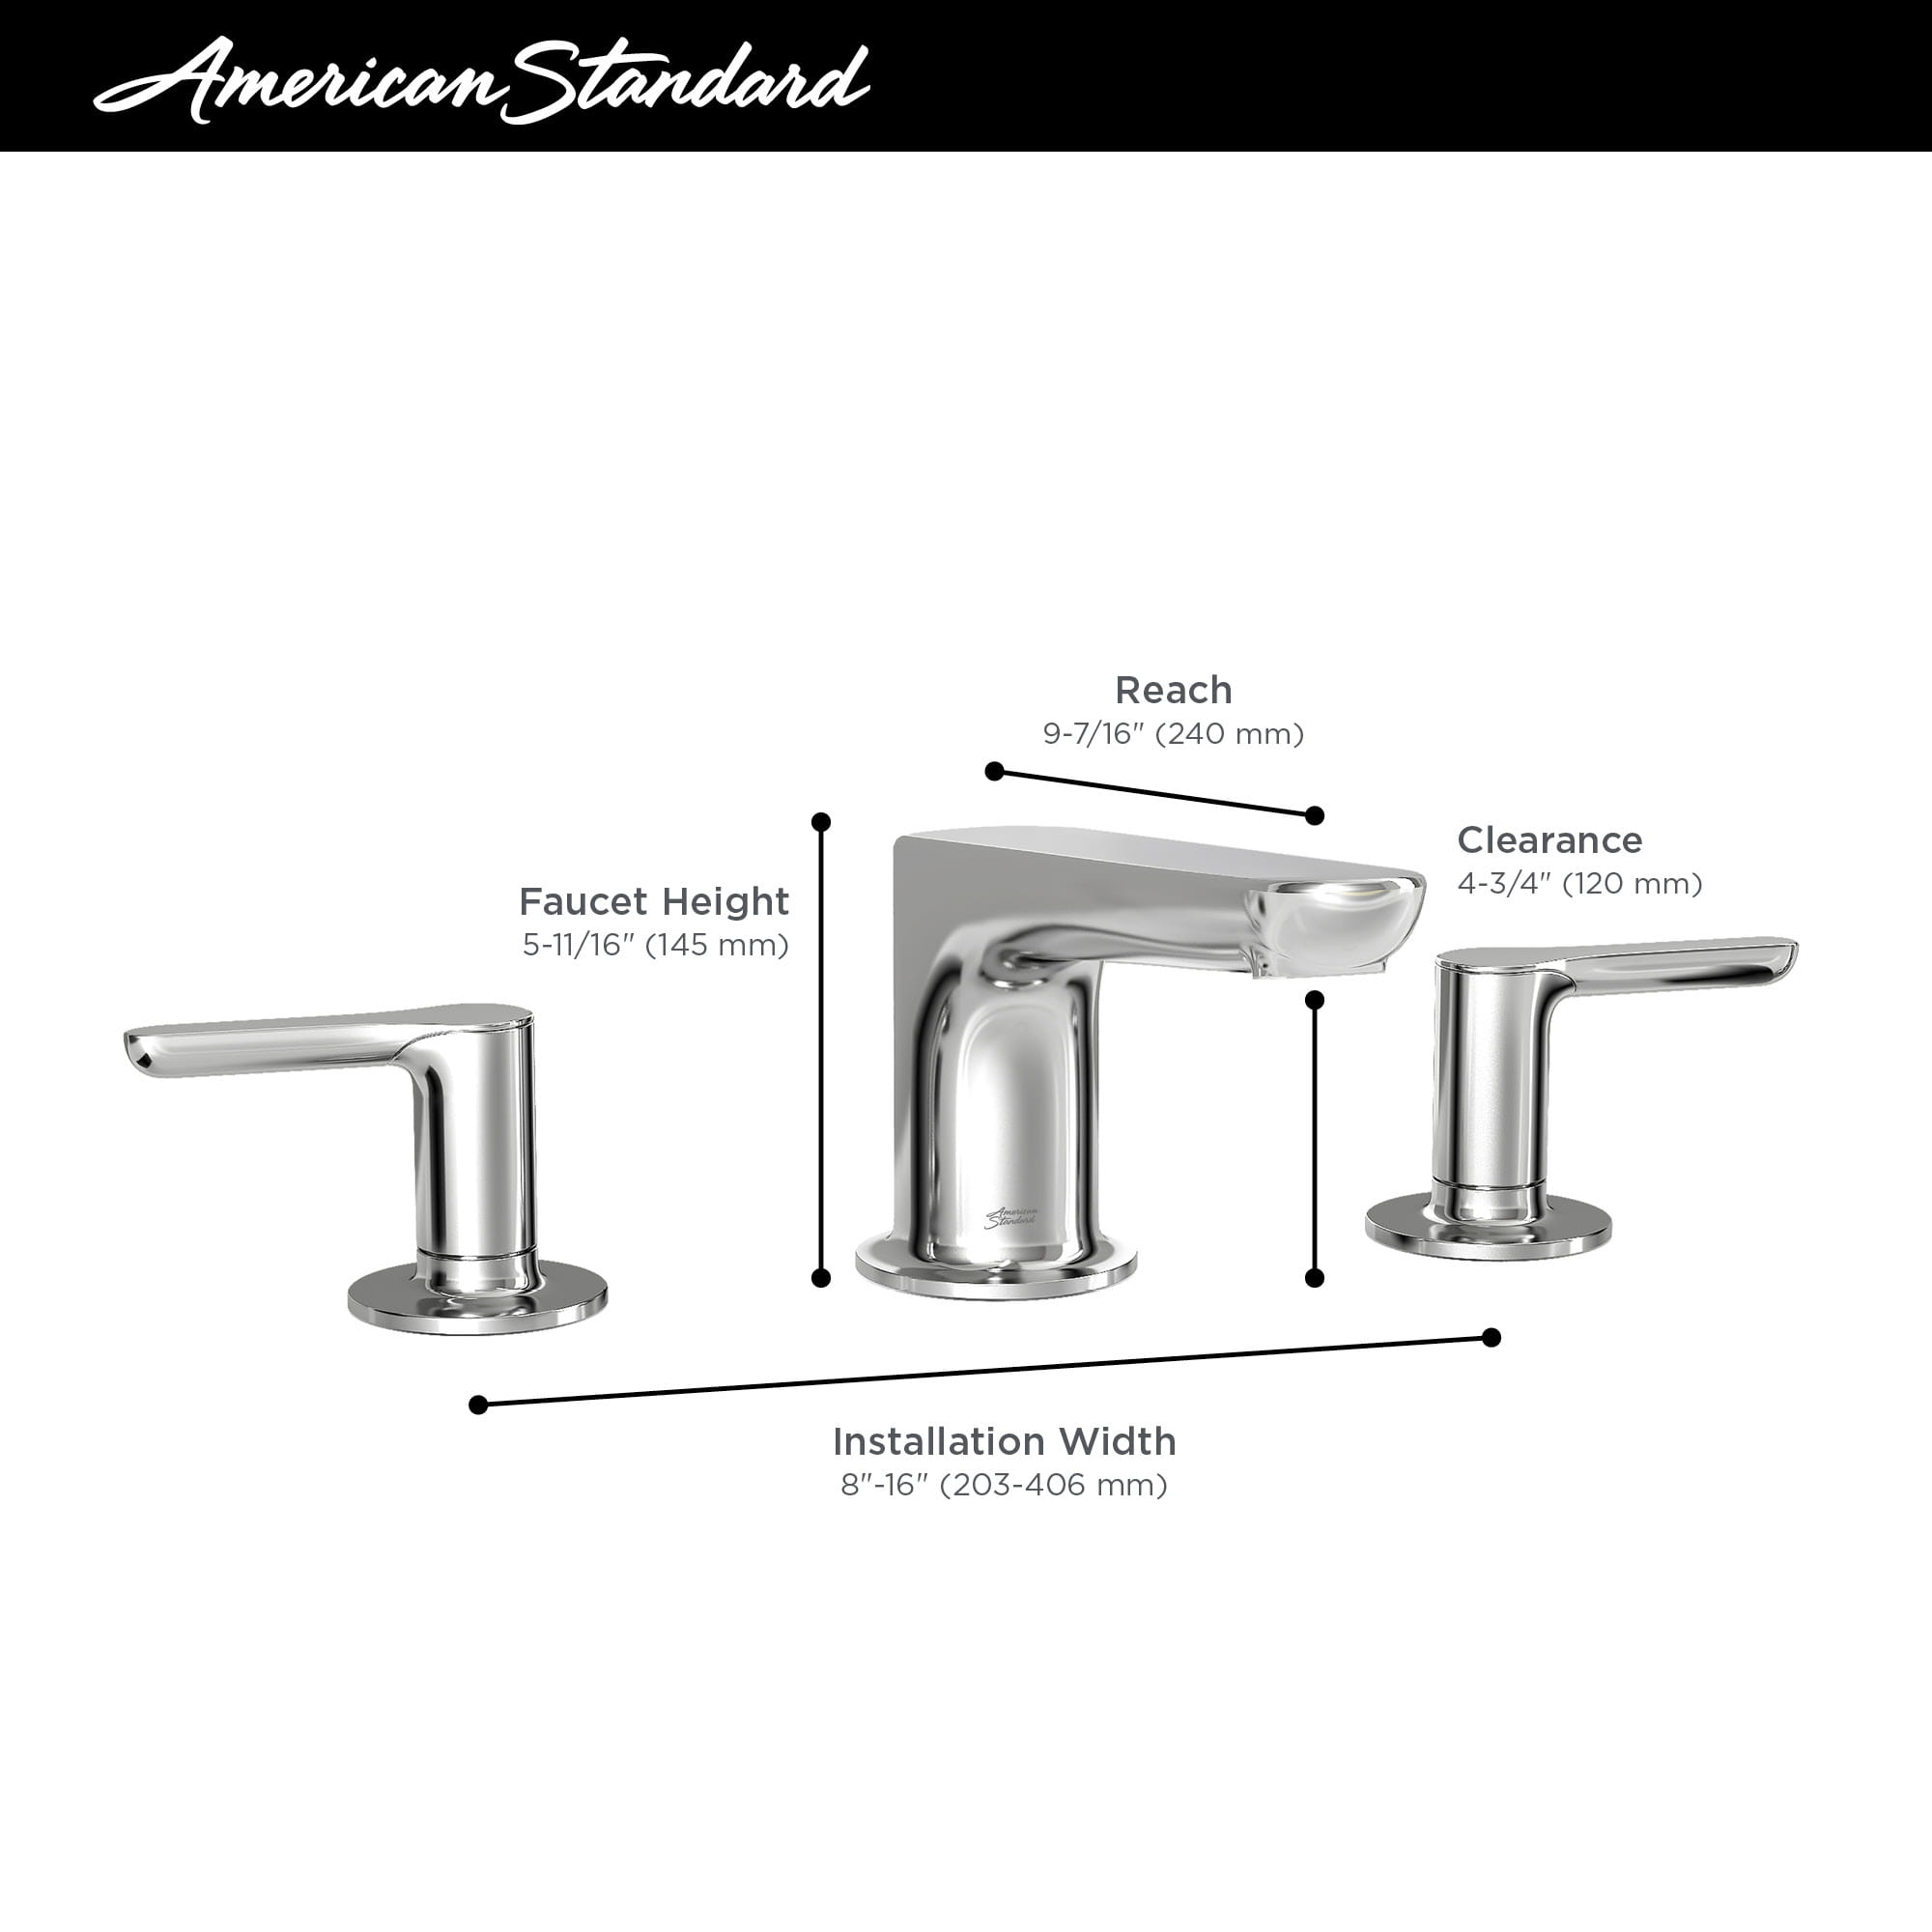 Studio S Bathtub Faucet for Flash Rough In Valve With Lever Handles BRUSHED NICKEL